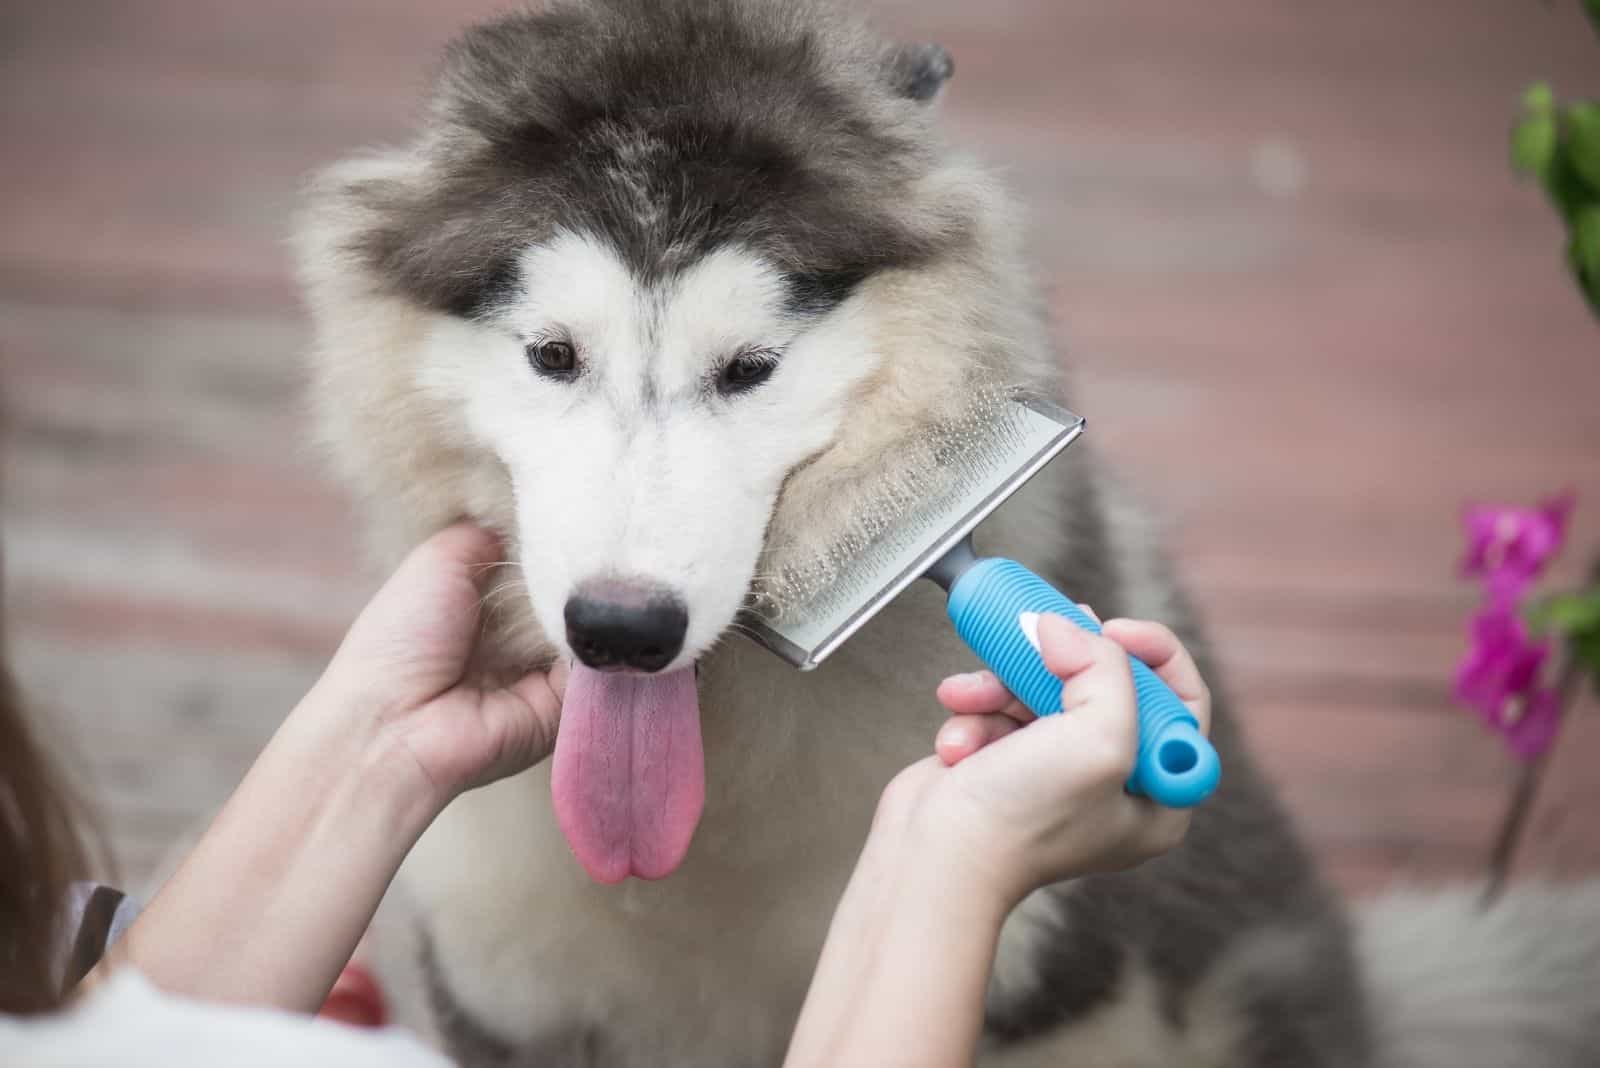 Asian woman using a comb brush the siberian husky puppy